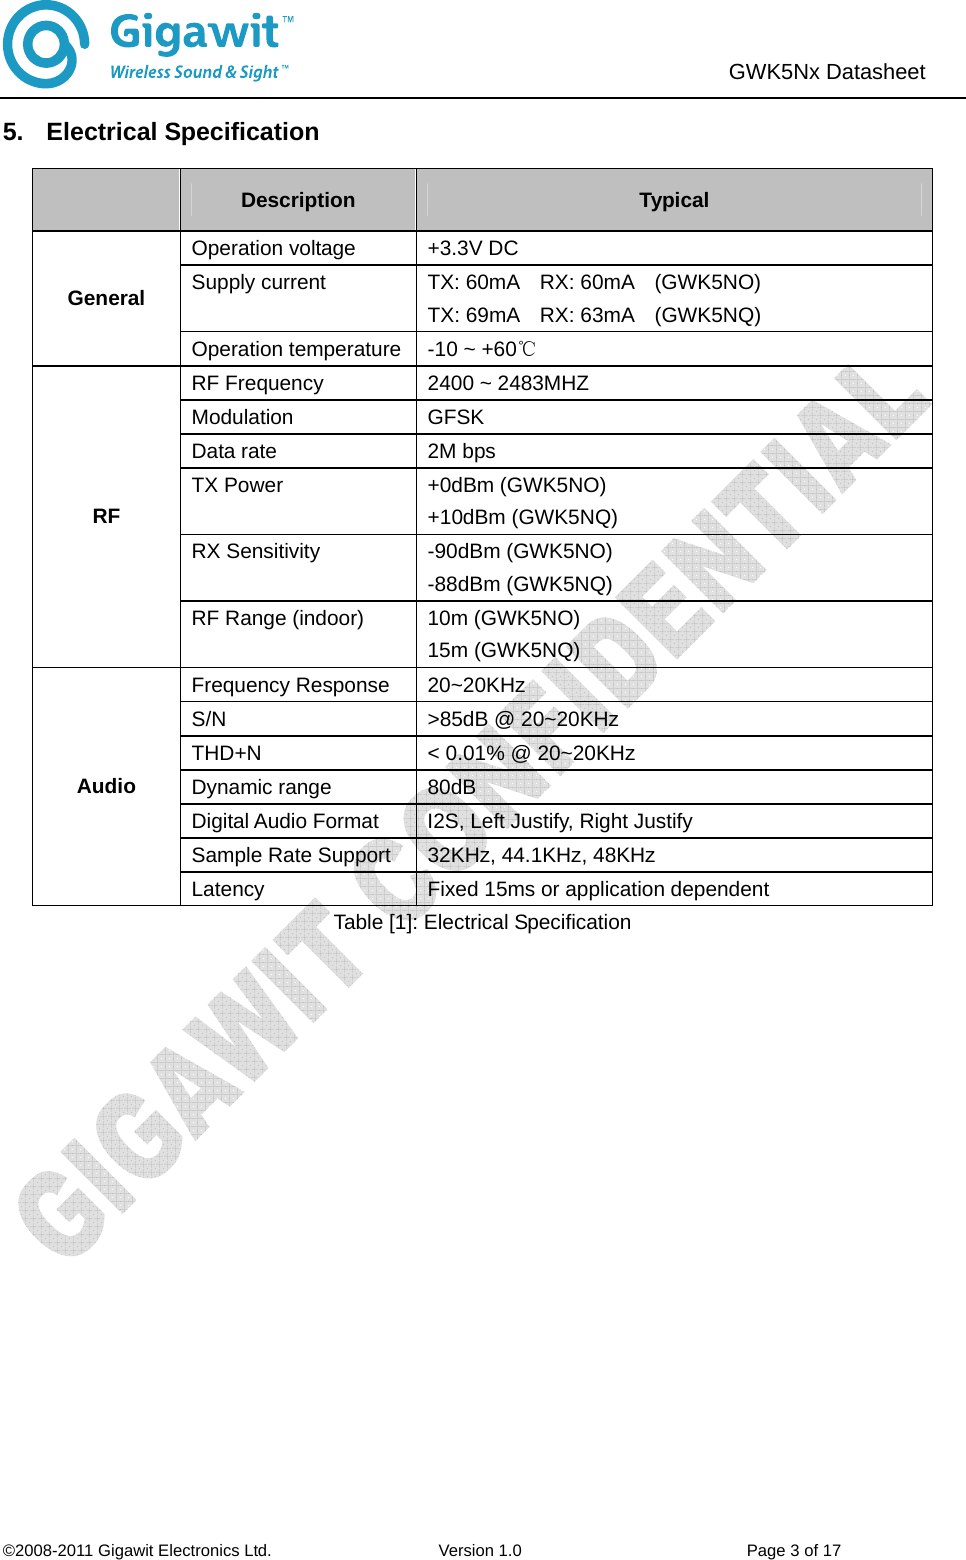                               ©2008-2011 Gigawit Electronics Ltd.                    Version 1.0                           Page 3 of 17  GWK5Nx Datasheet   5. Electrical Specification Table [1]: Electrical Specification  Description  Typical Operation voltage  +3.3V DC Supply current  TX: 60mA  RX: 60mA  (GWK5NO) TX: 69mA  RX: 63mA  (GWK5NQ) General Operation temperature -10 ~ +60℃ RF Frequency    2400 ~ 2483MHZ Modulation GFSK Data rate  2M bps TX Power  +0dBm (GWK5NO) +10dBm (GWK5NQ) RX Sensitivity  -90dBm (GWK5NO) -88dBm (GWK5NQ) RF RF Range (indoor)  10m (GWK5NO) 15m (GWK5NQ) Frequency Response  20~20KHz S/N  &gt;85dB @ 20~20KHz THD+N  &lt; 0.01% @ 20~20KHz Dynamic range  80dB Digital Audio Format  I2S, Left Justify, Right Justify Sample Rate Support  32KHz, 44.1KHz, 48KHz Audio Latency  Fixed 15ms or application dependent 